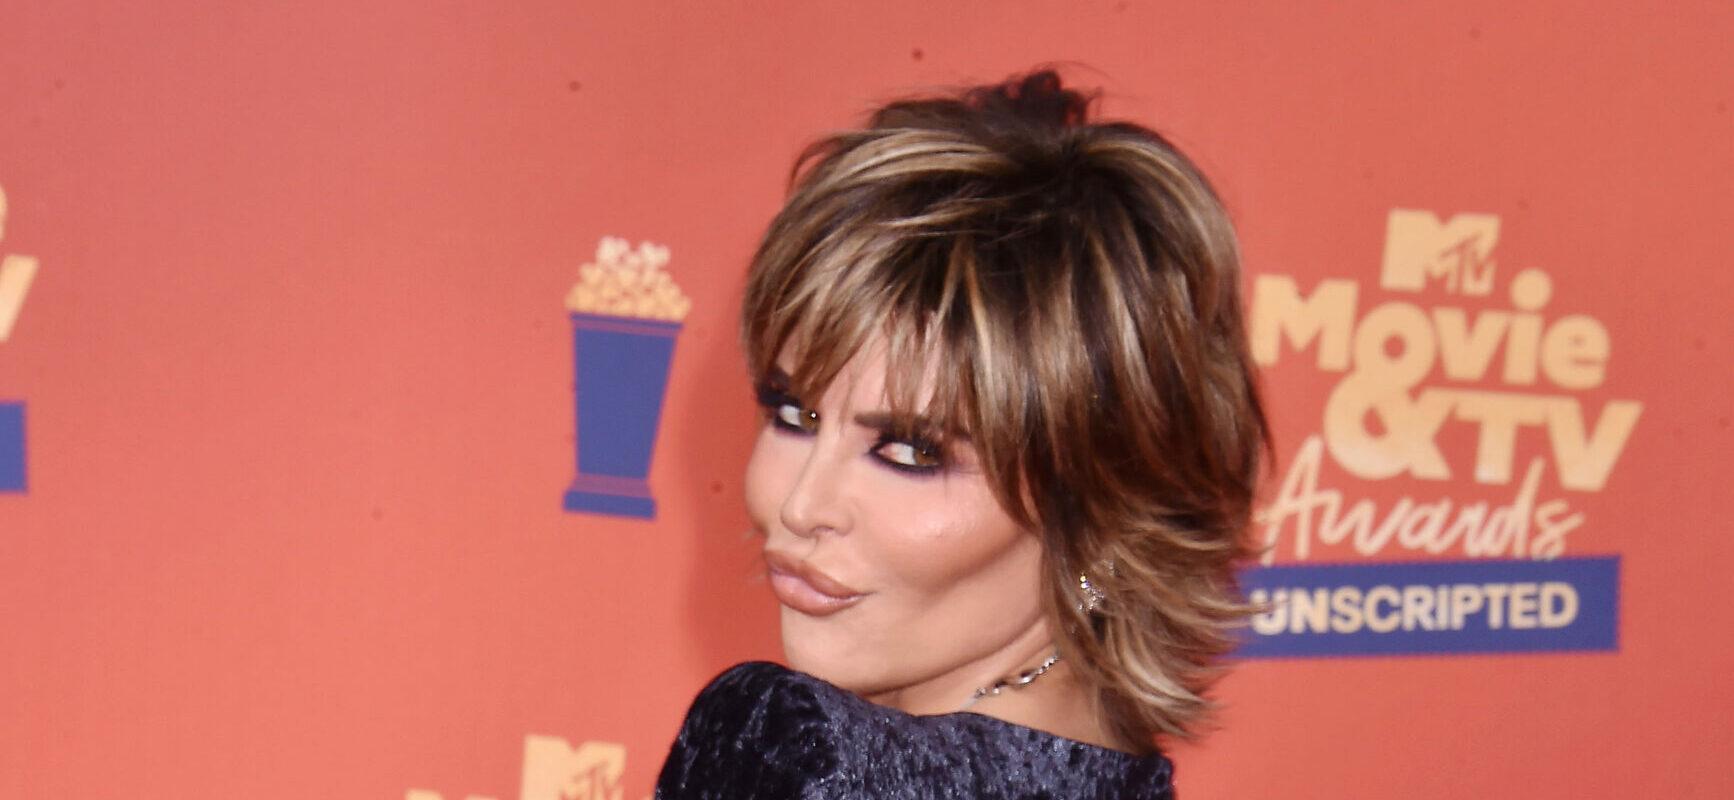 Lisa Rinna Commemorates Time On ‘Real Housewives Of Beverly Hills’